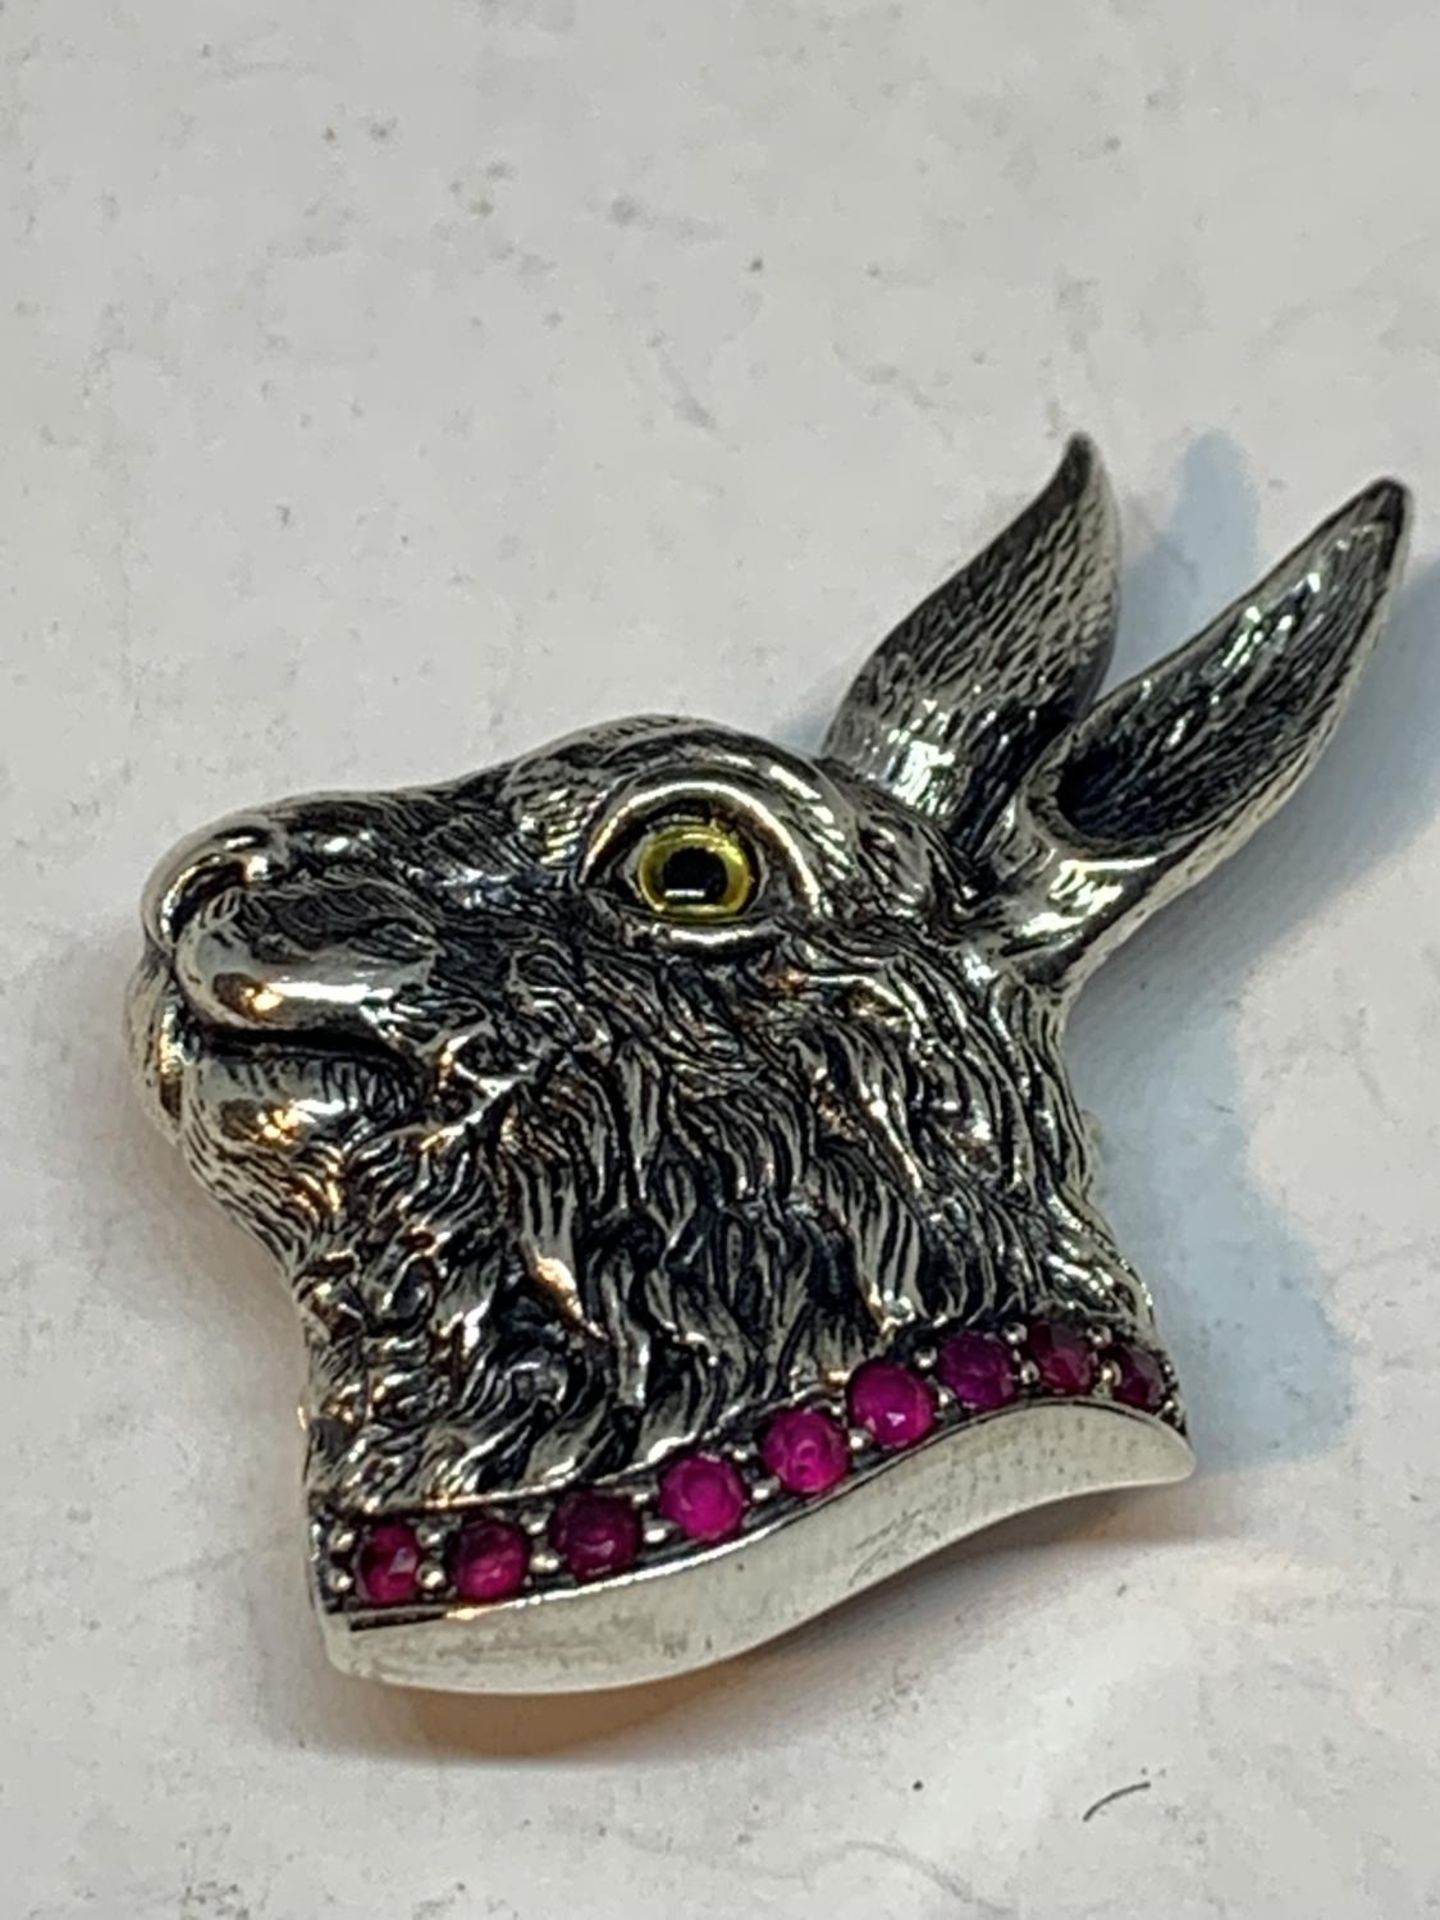 A MARKED SILVER HARE DESIGN PENDANT/BROOCH WITH A GREEN STONE COLLAR